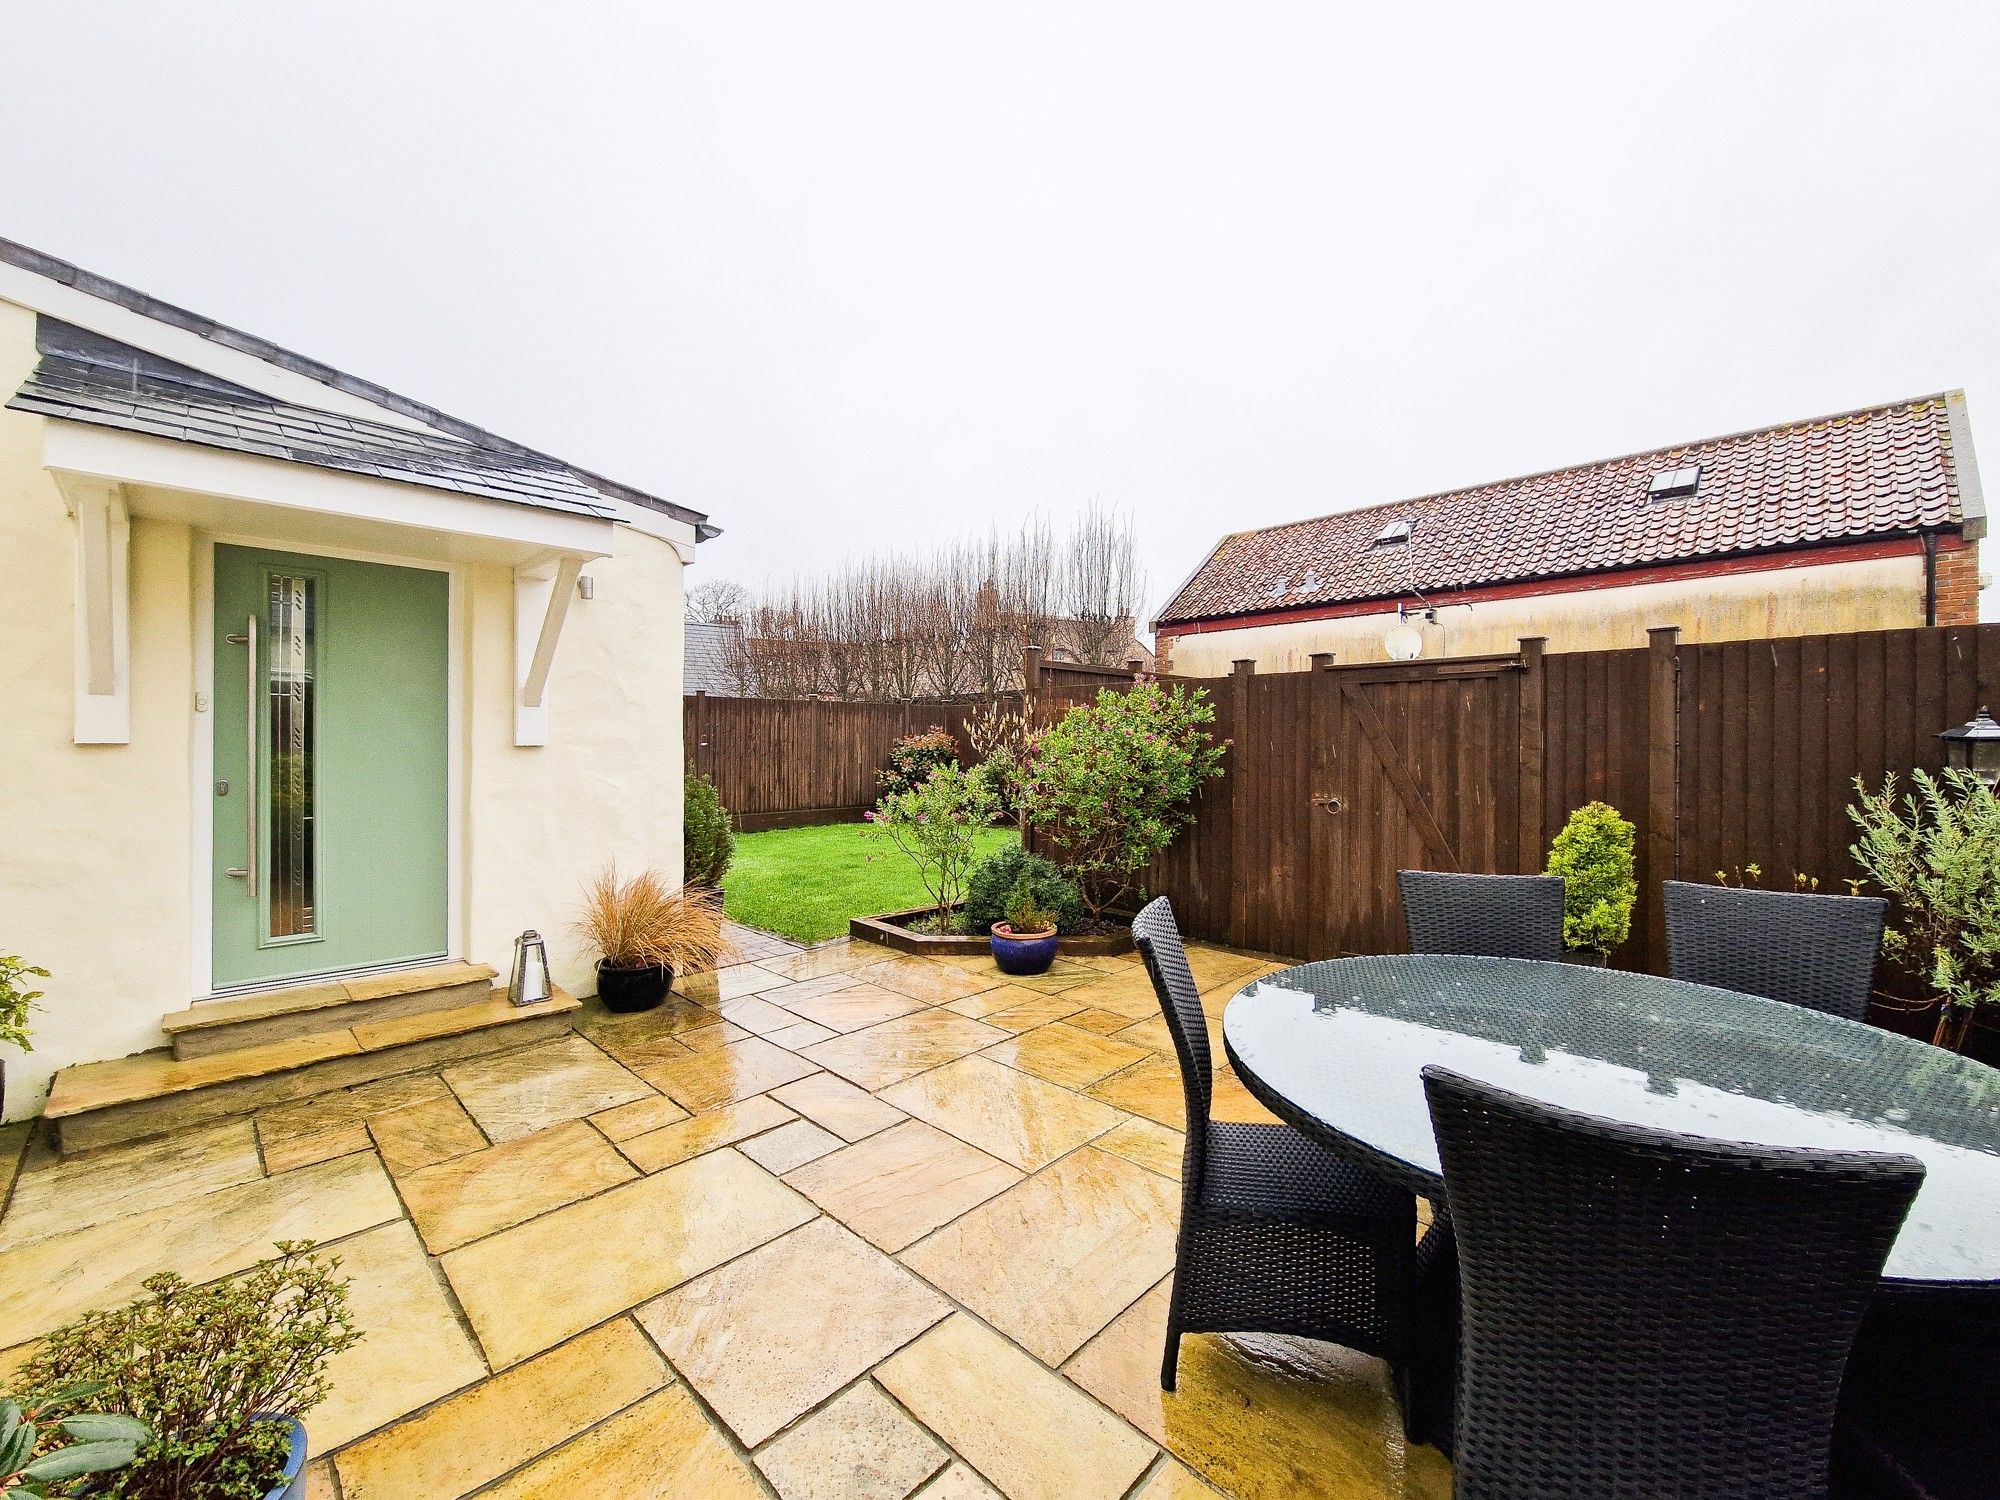 3 bed Property For Sale in St. Lawrence, Jersey